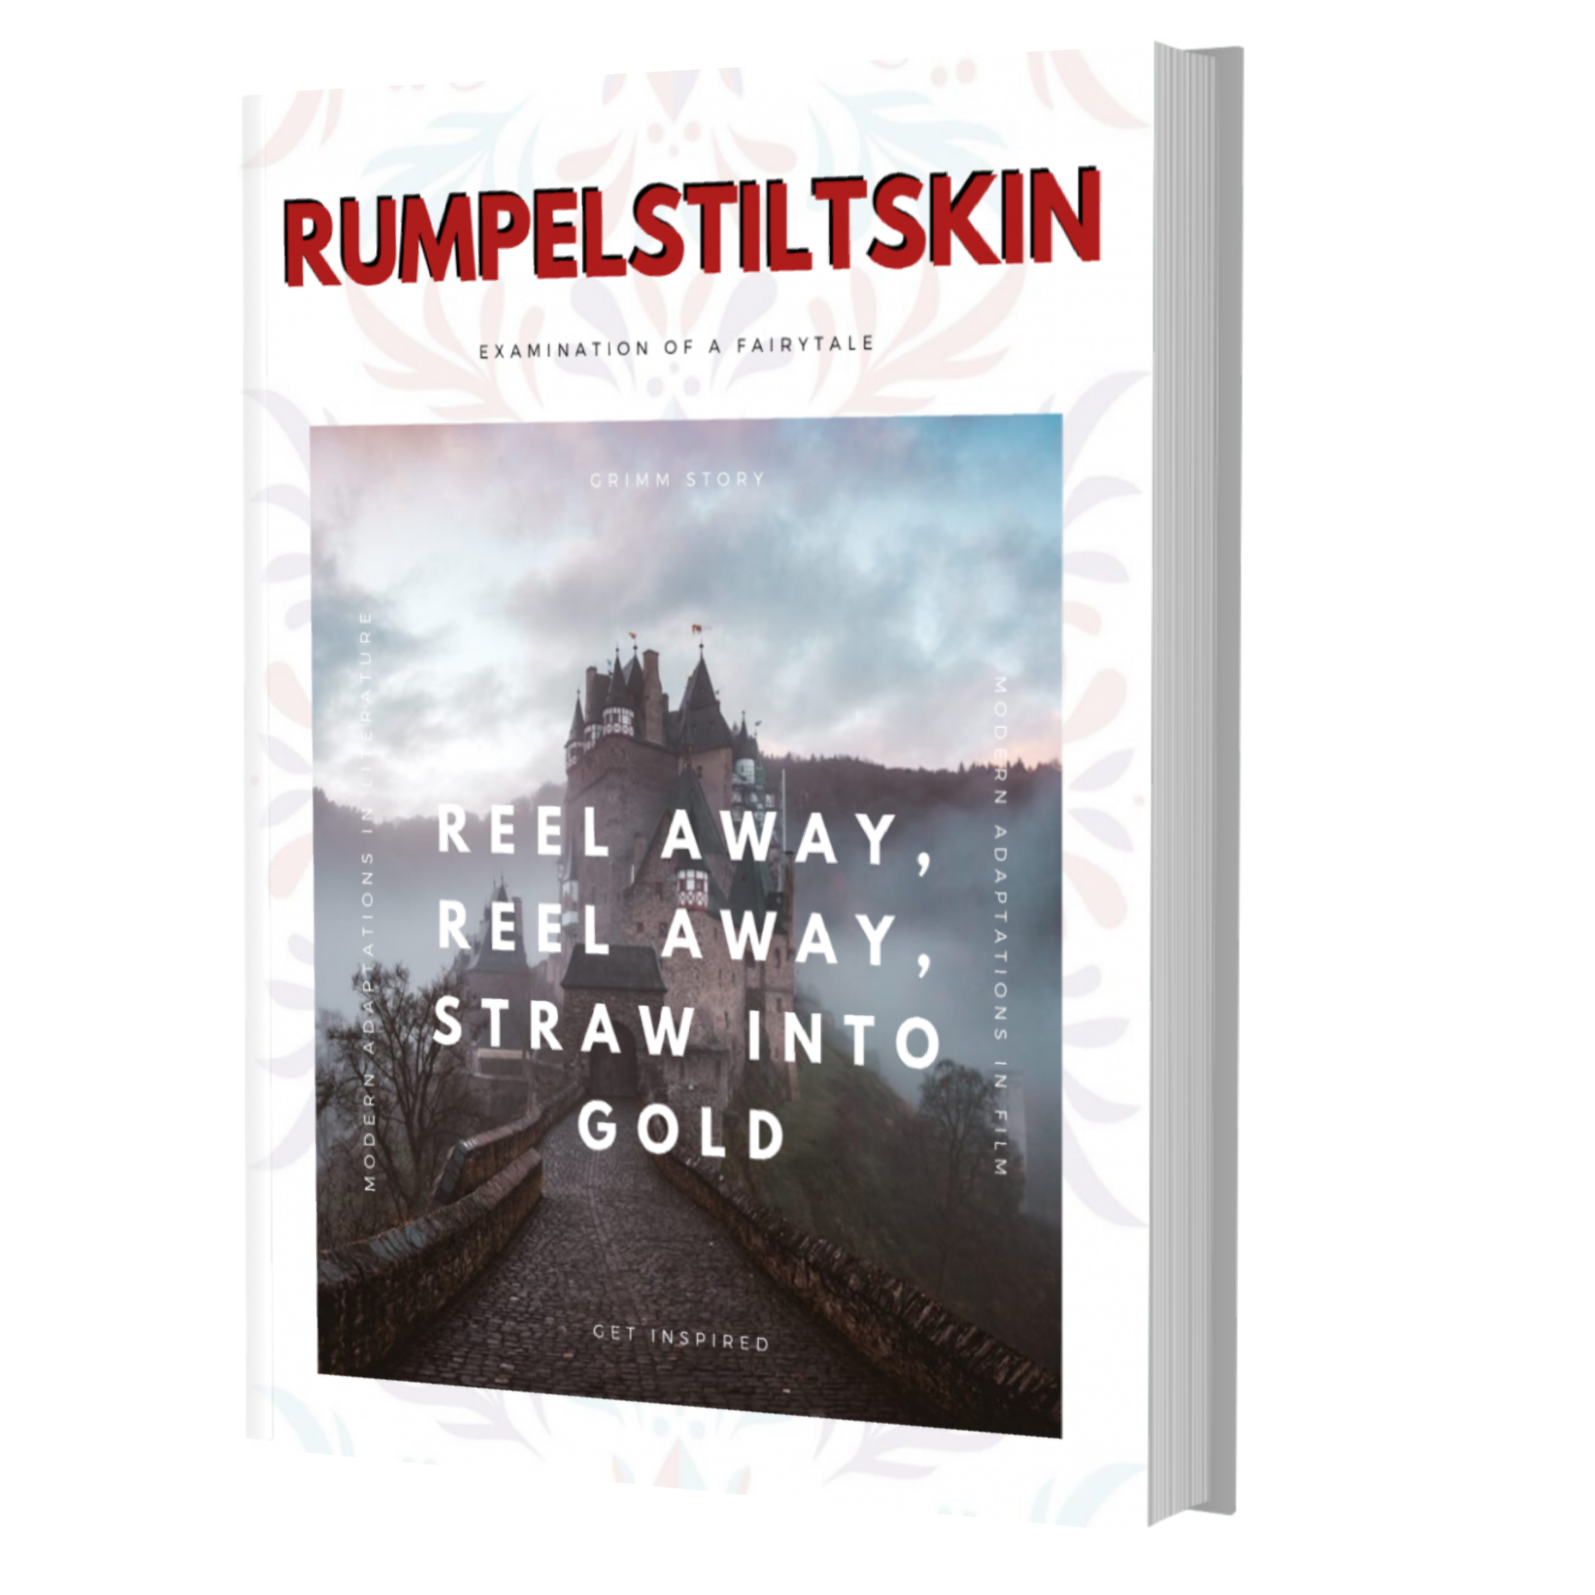 A mock book cover for the RUMPELSTILTSKIN examinations of a fairytale ebook